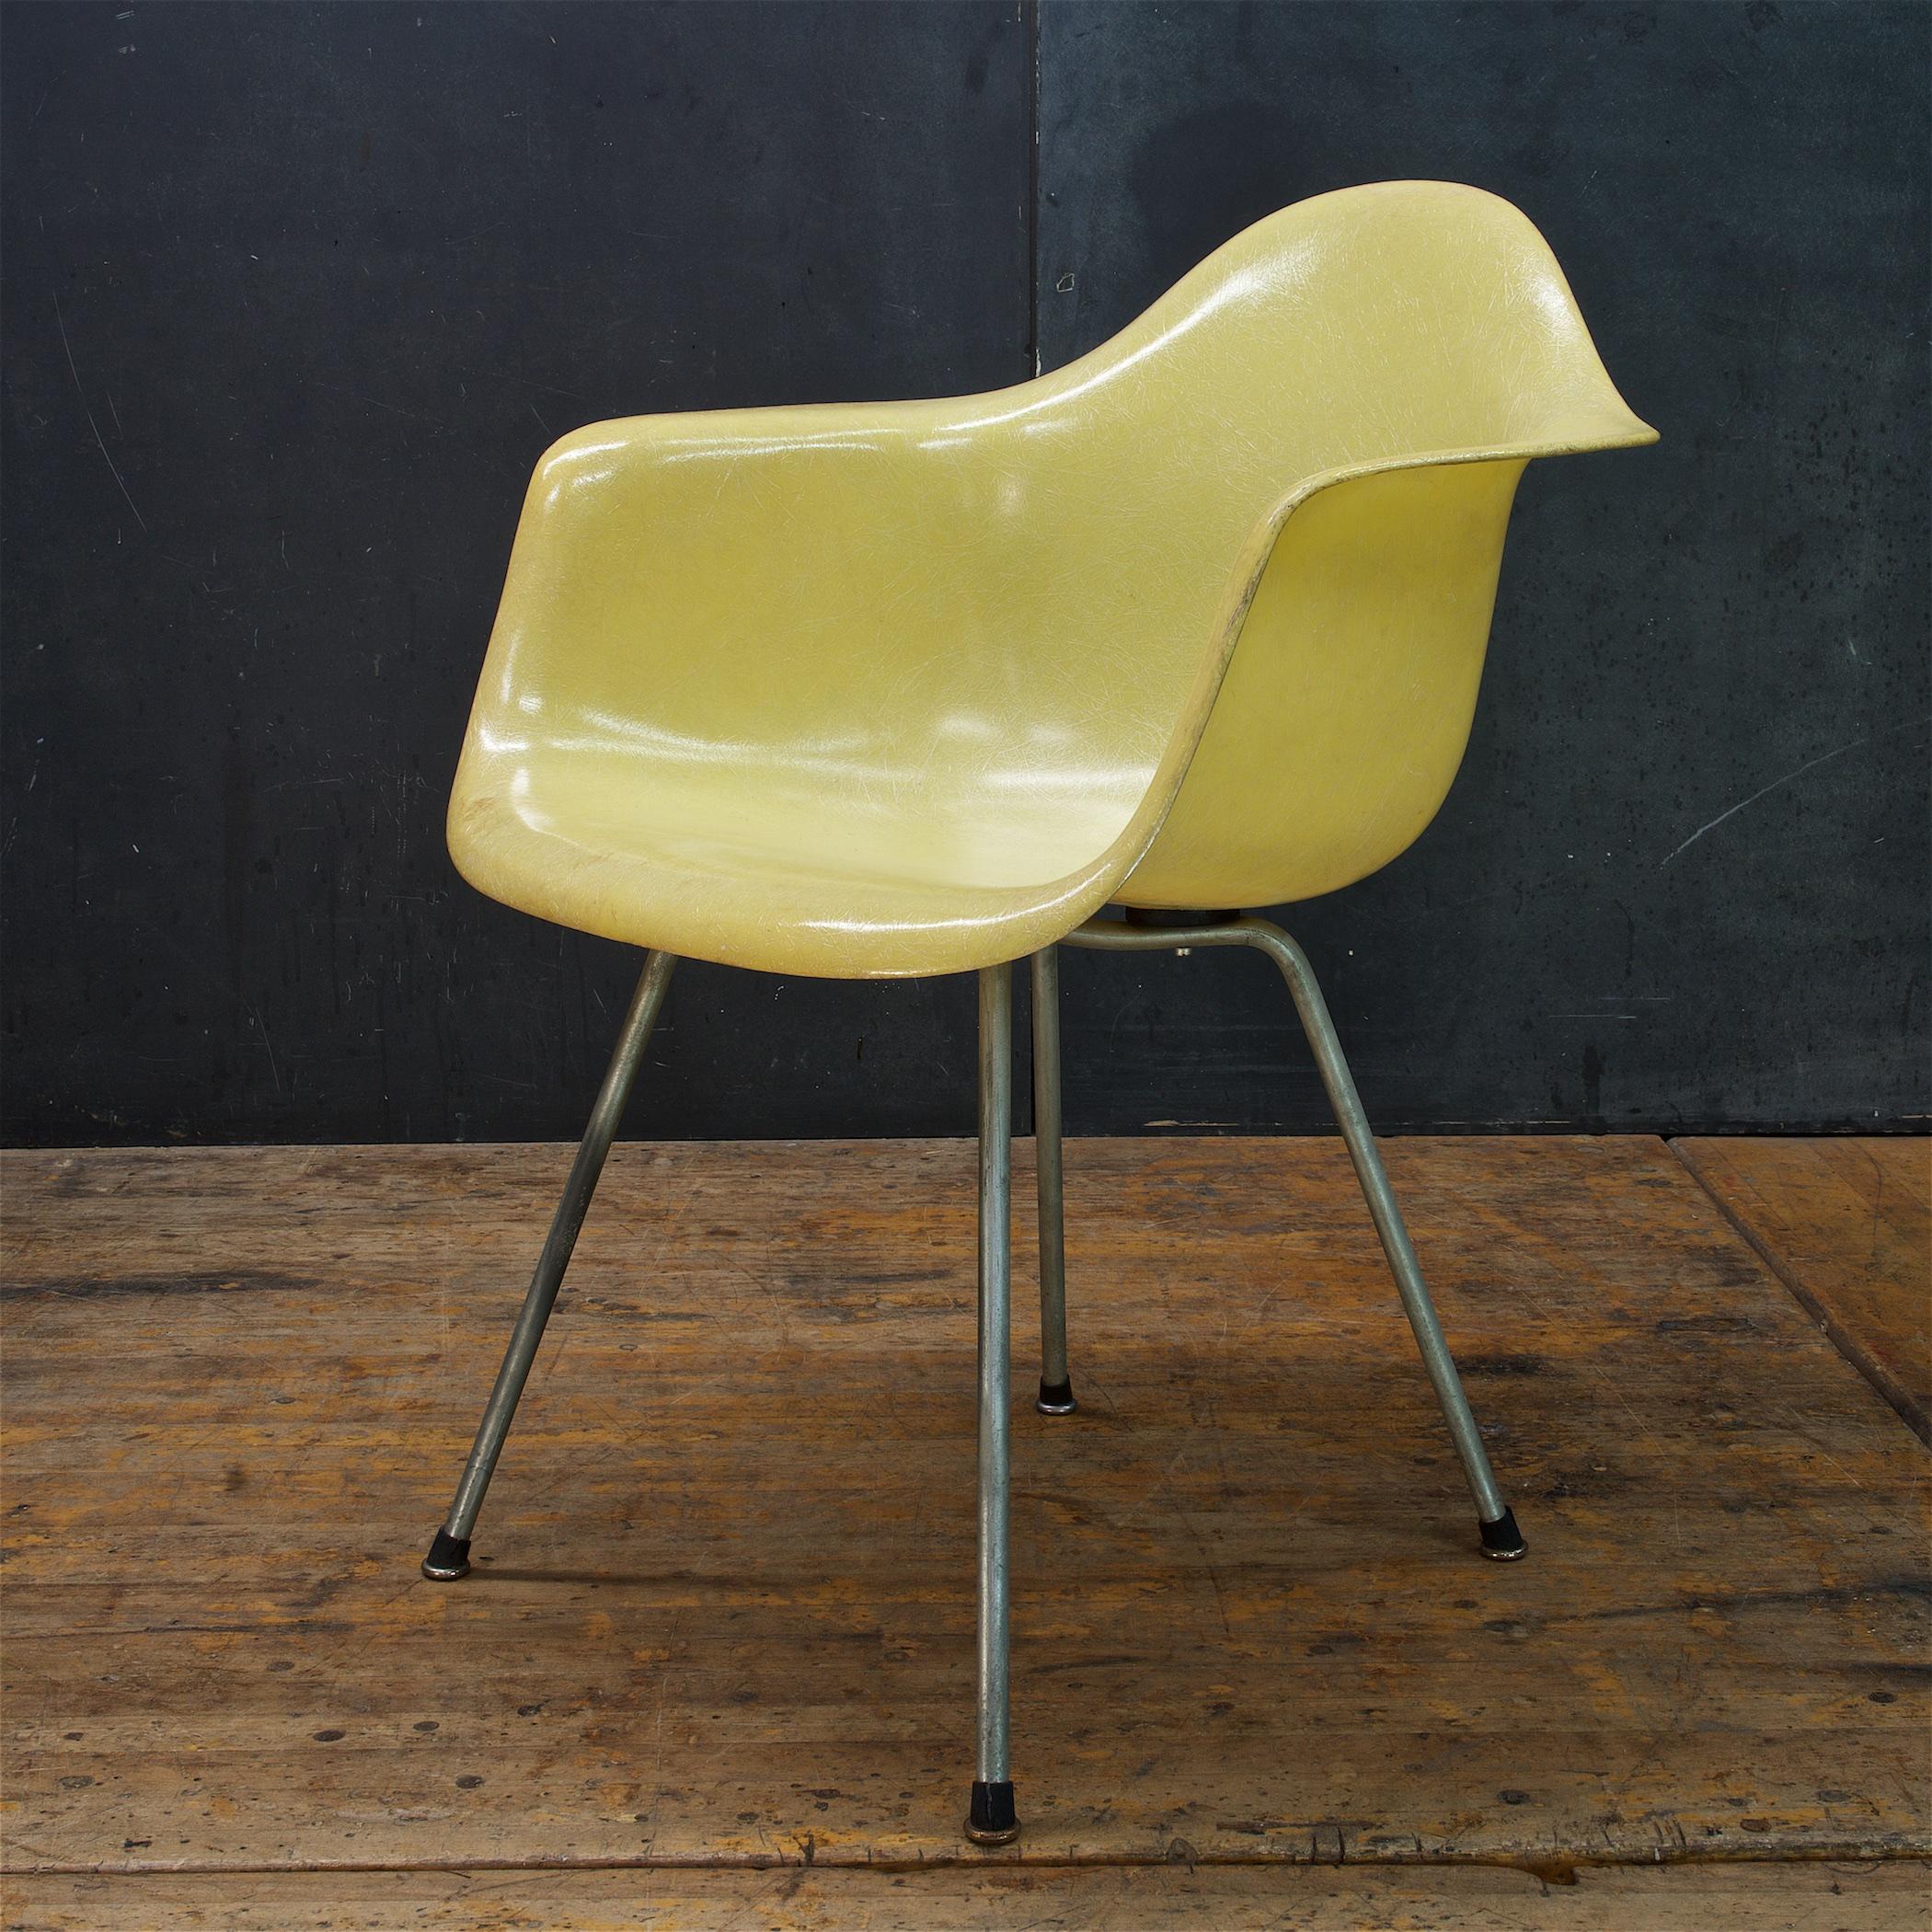 An extremely clean museum quality example. Made between 1951-1952, these are generally referred to as, '2nd generation.' These were also shipped from the Venice Eames Office like the 1st iterations of the design. This chair was also produced from